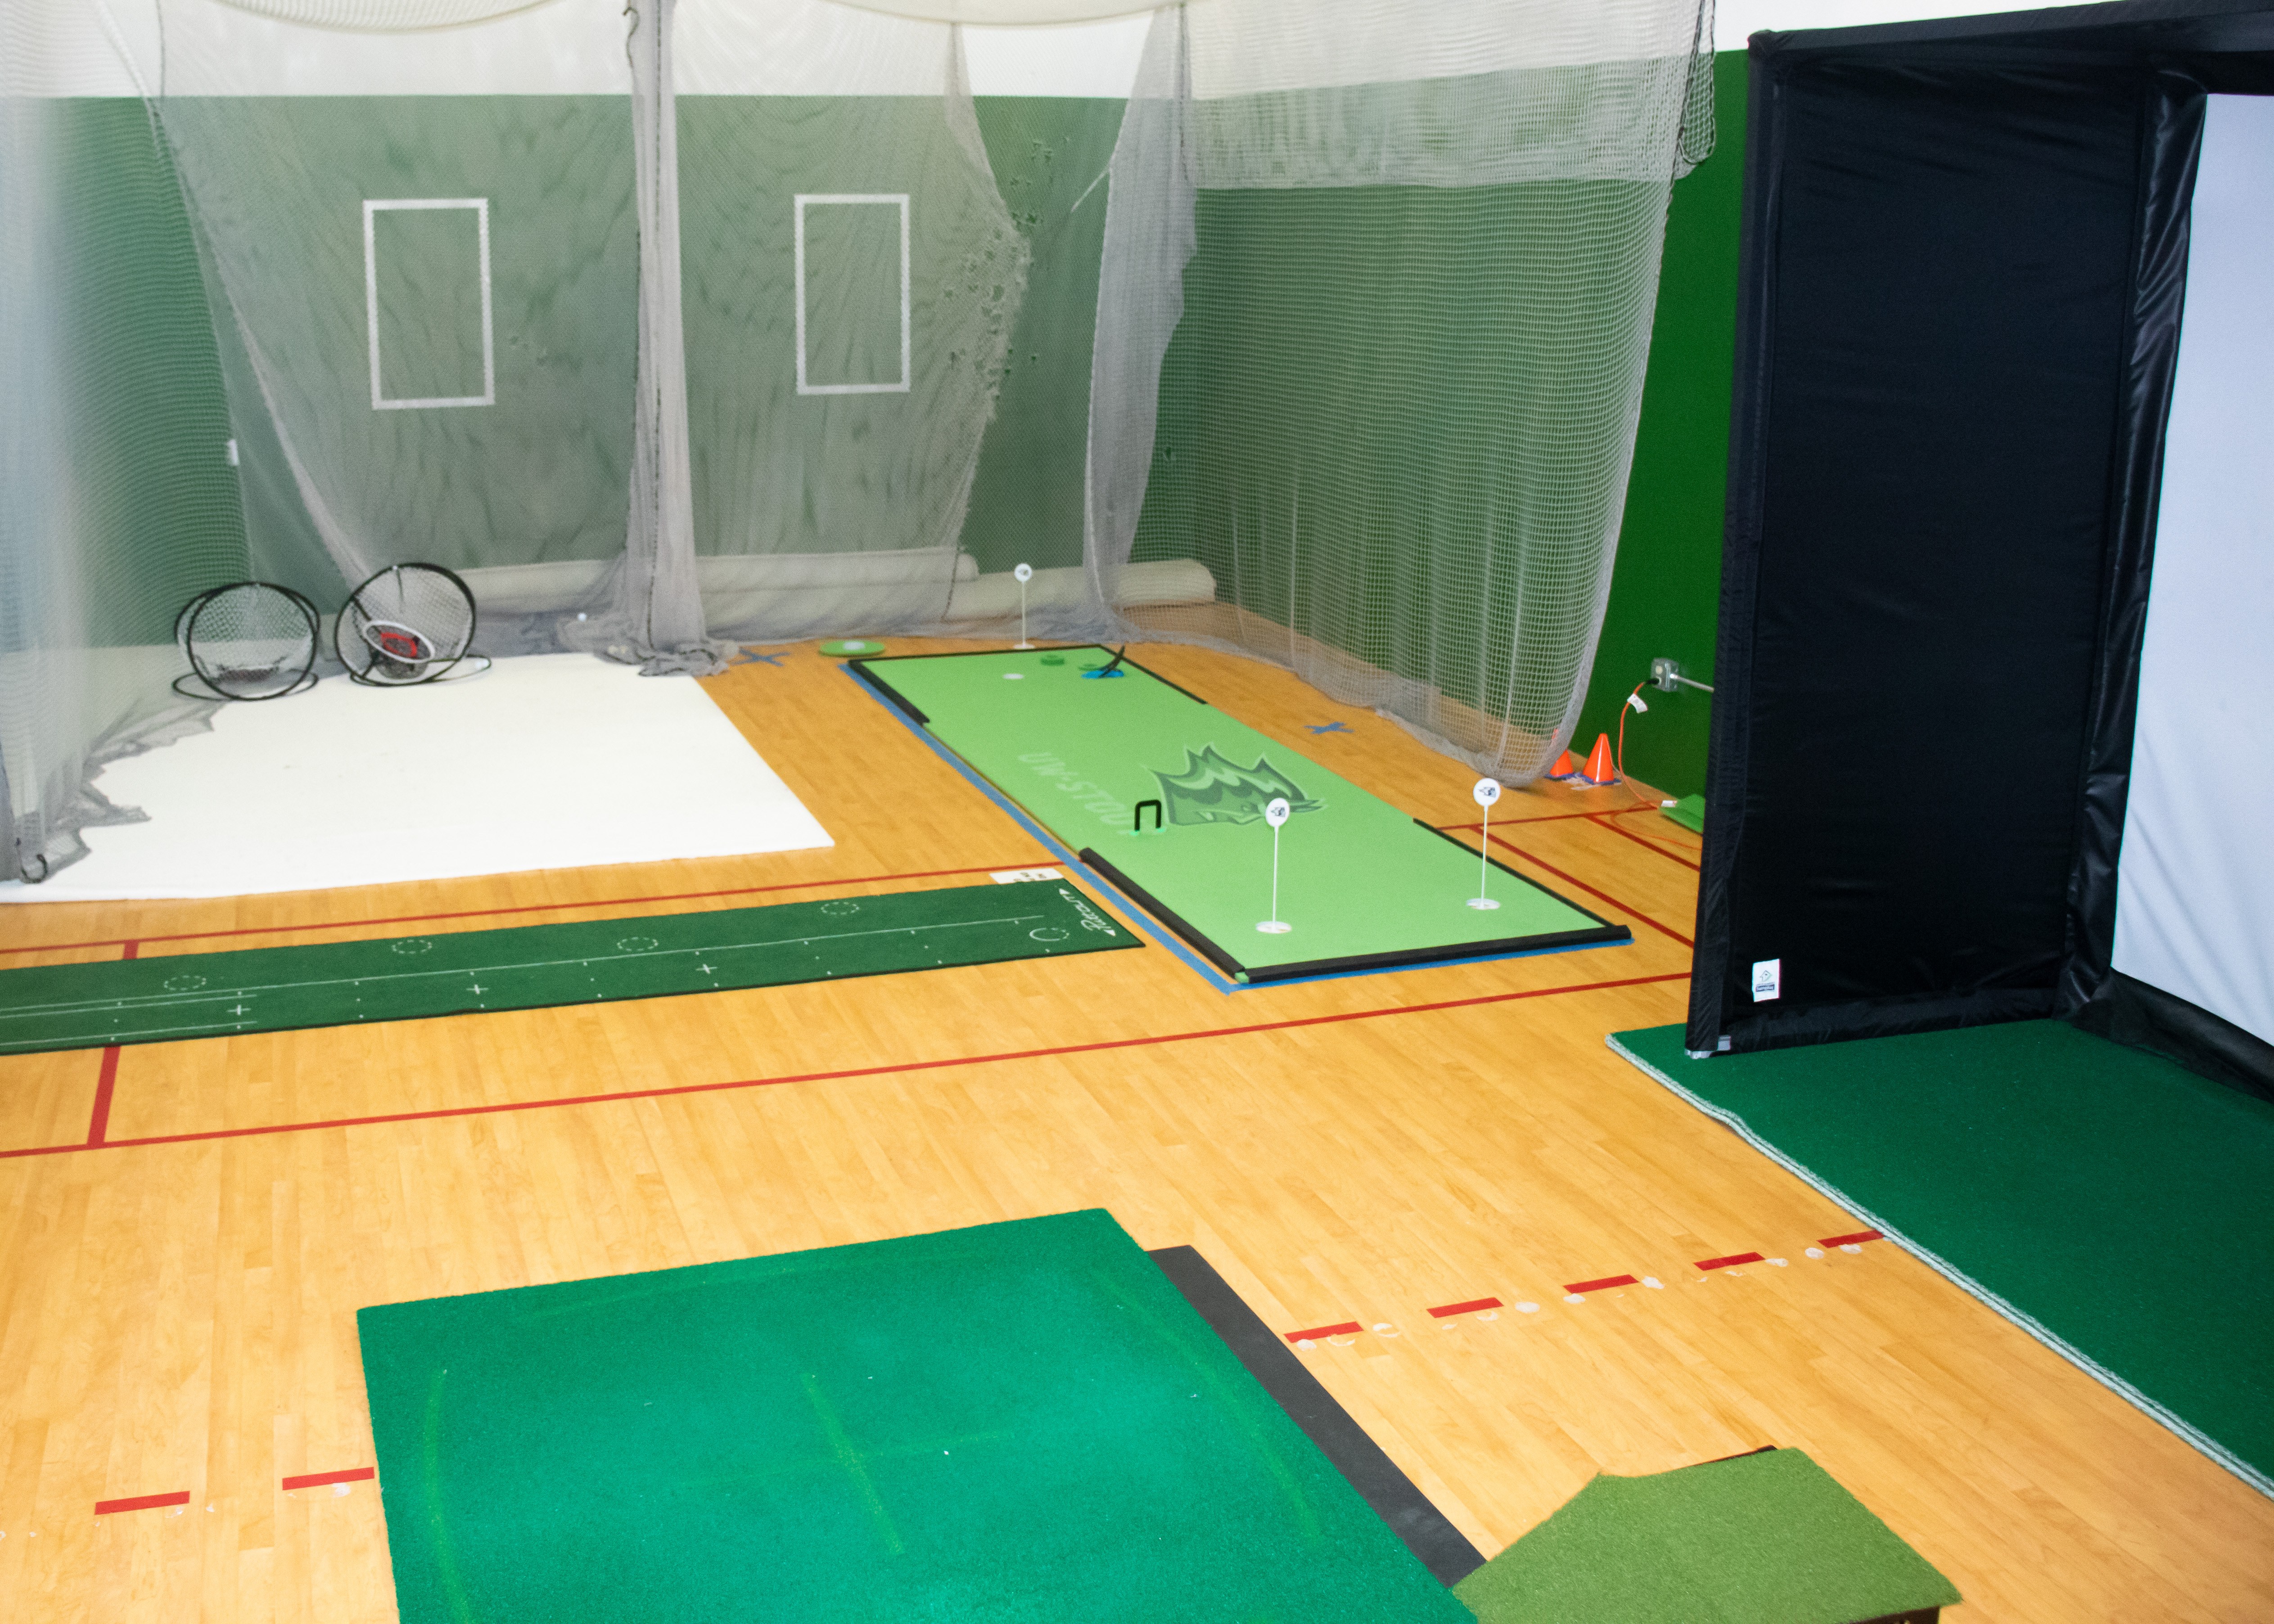 Photo illustrating the layout of golf room with driving range, putting green and golf simulator.